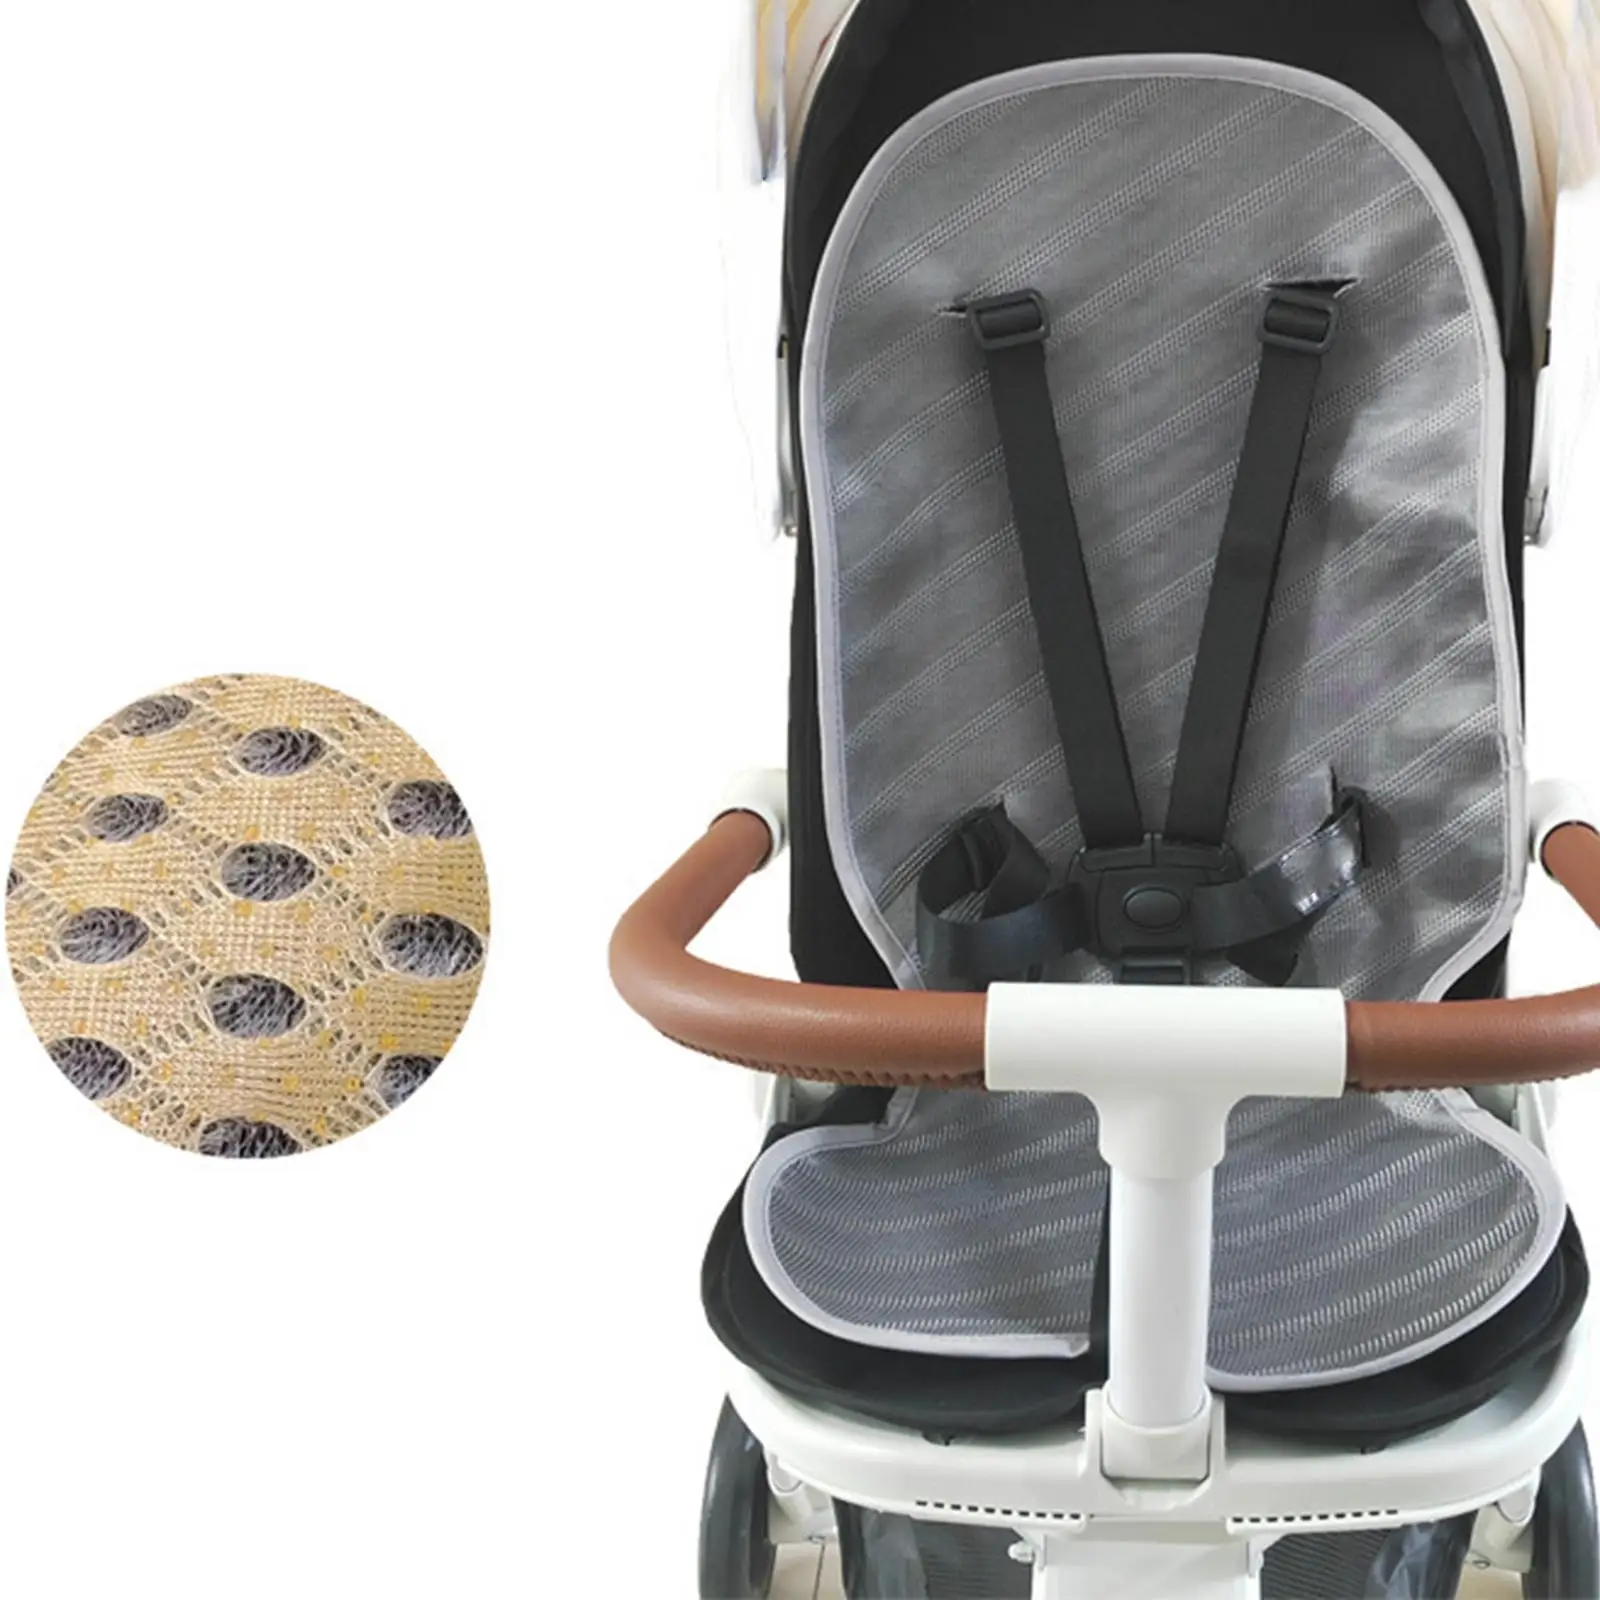 Pushchair Seat Cooling Mat Breathable Strollers Cool Seat Pad Summer Cooling Seat Pad for Child Safety Seat Trolley Pram